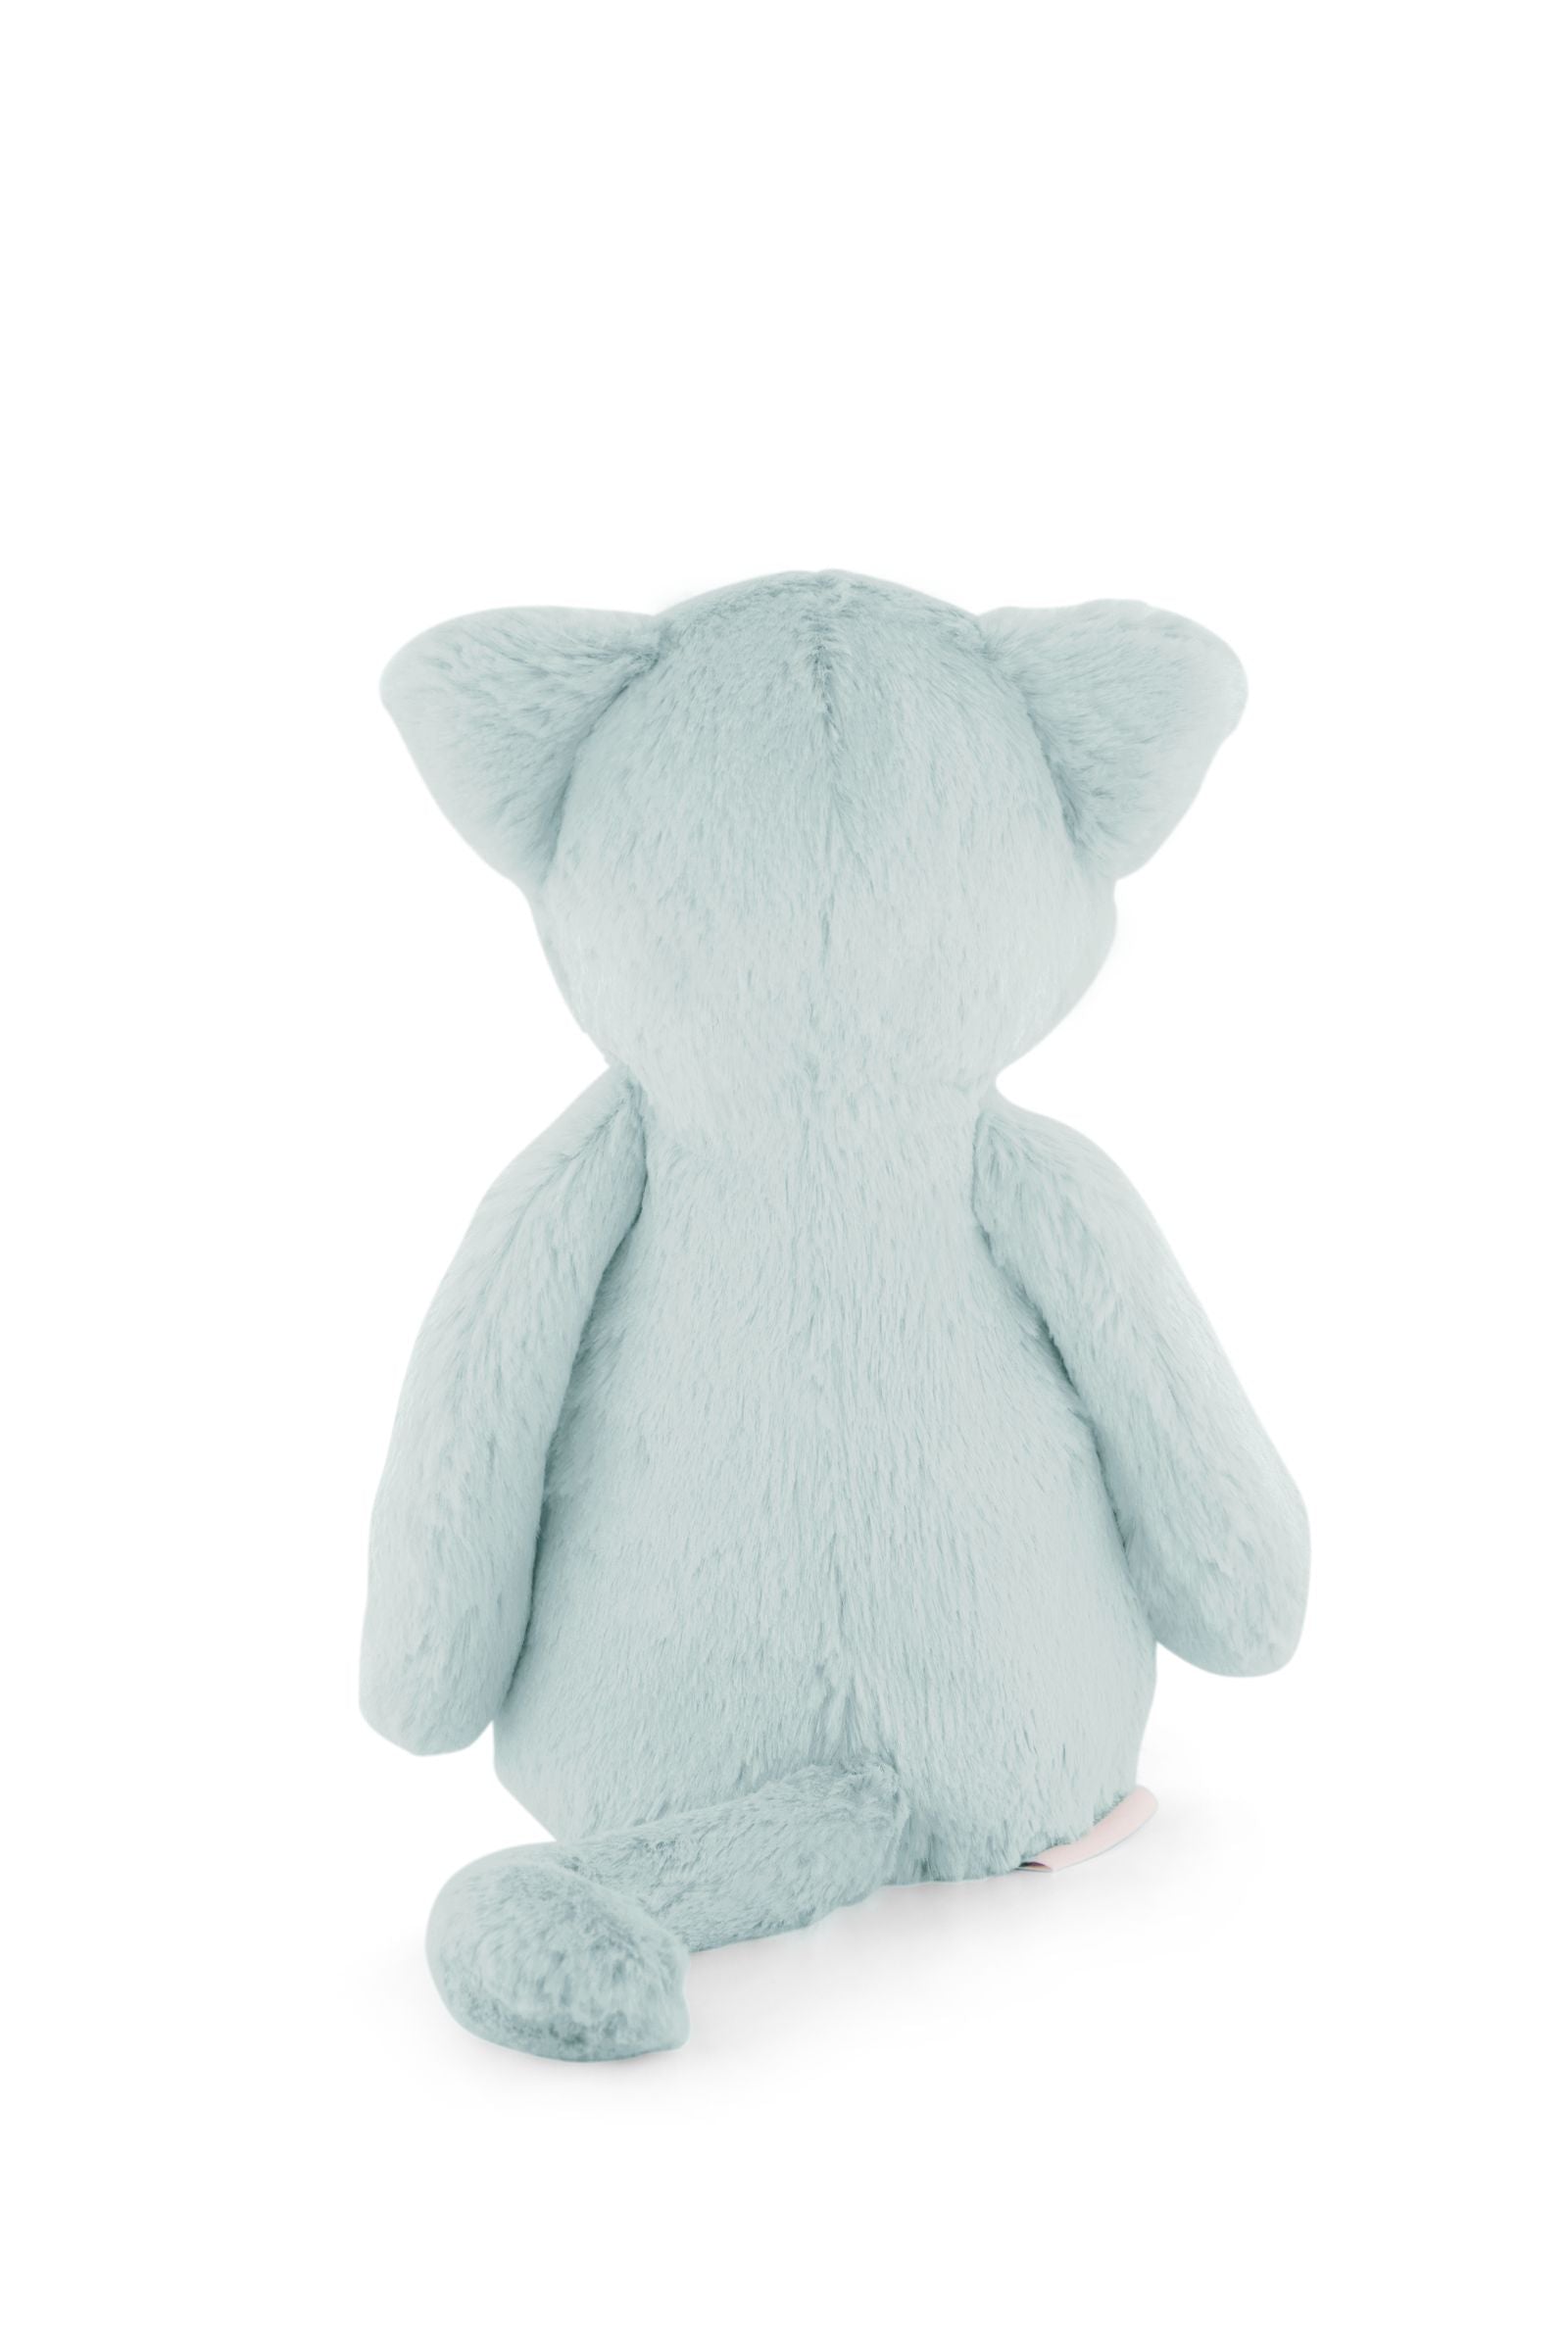 Snuggle Bunnies - Elsie the Kitty - Sprout 30cm-Toys-Jamie Kay-The Bay Room